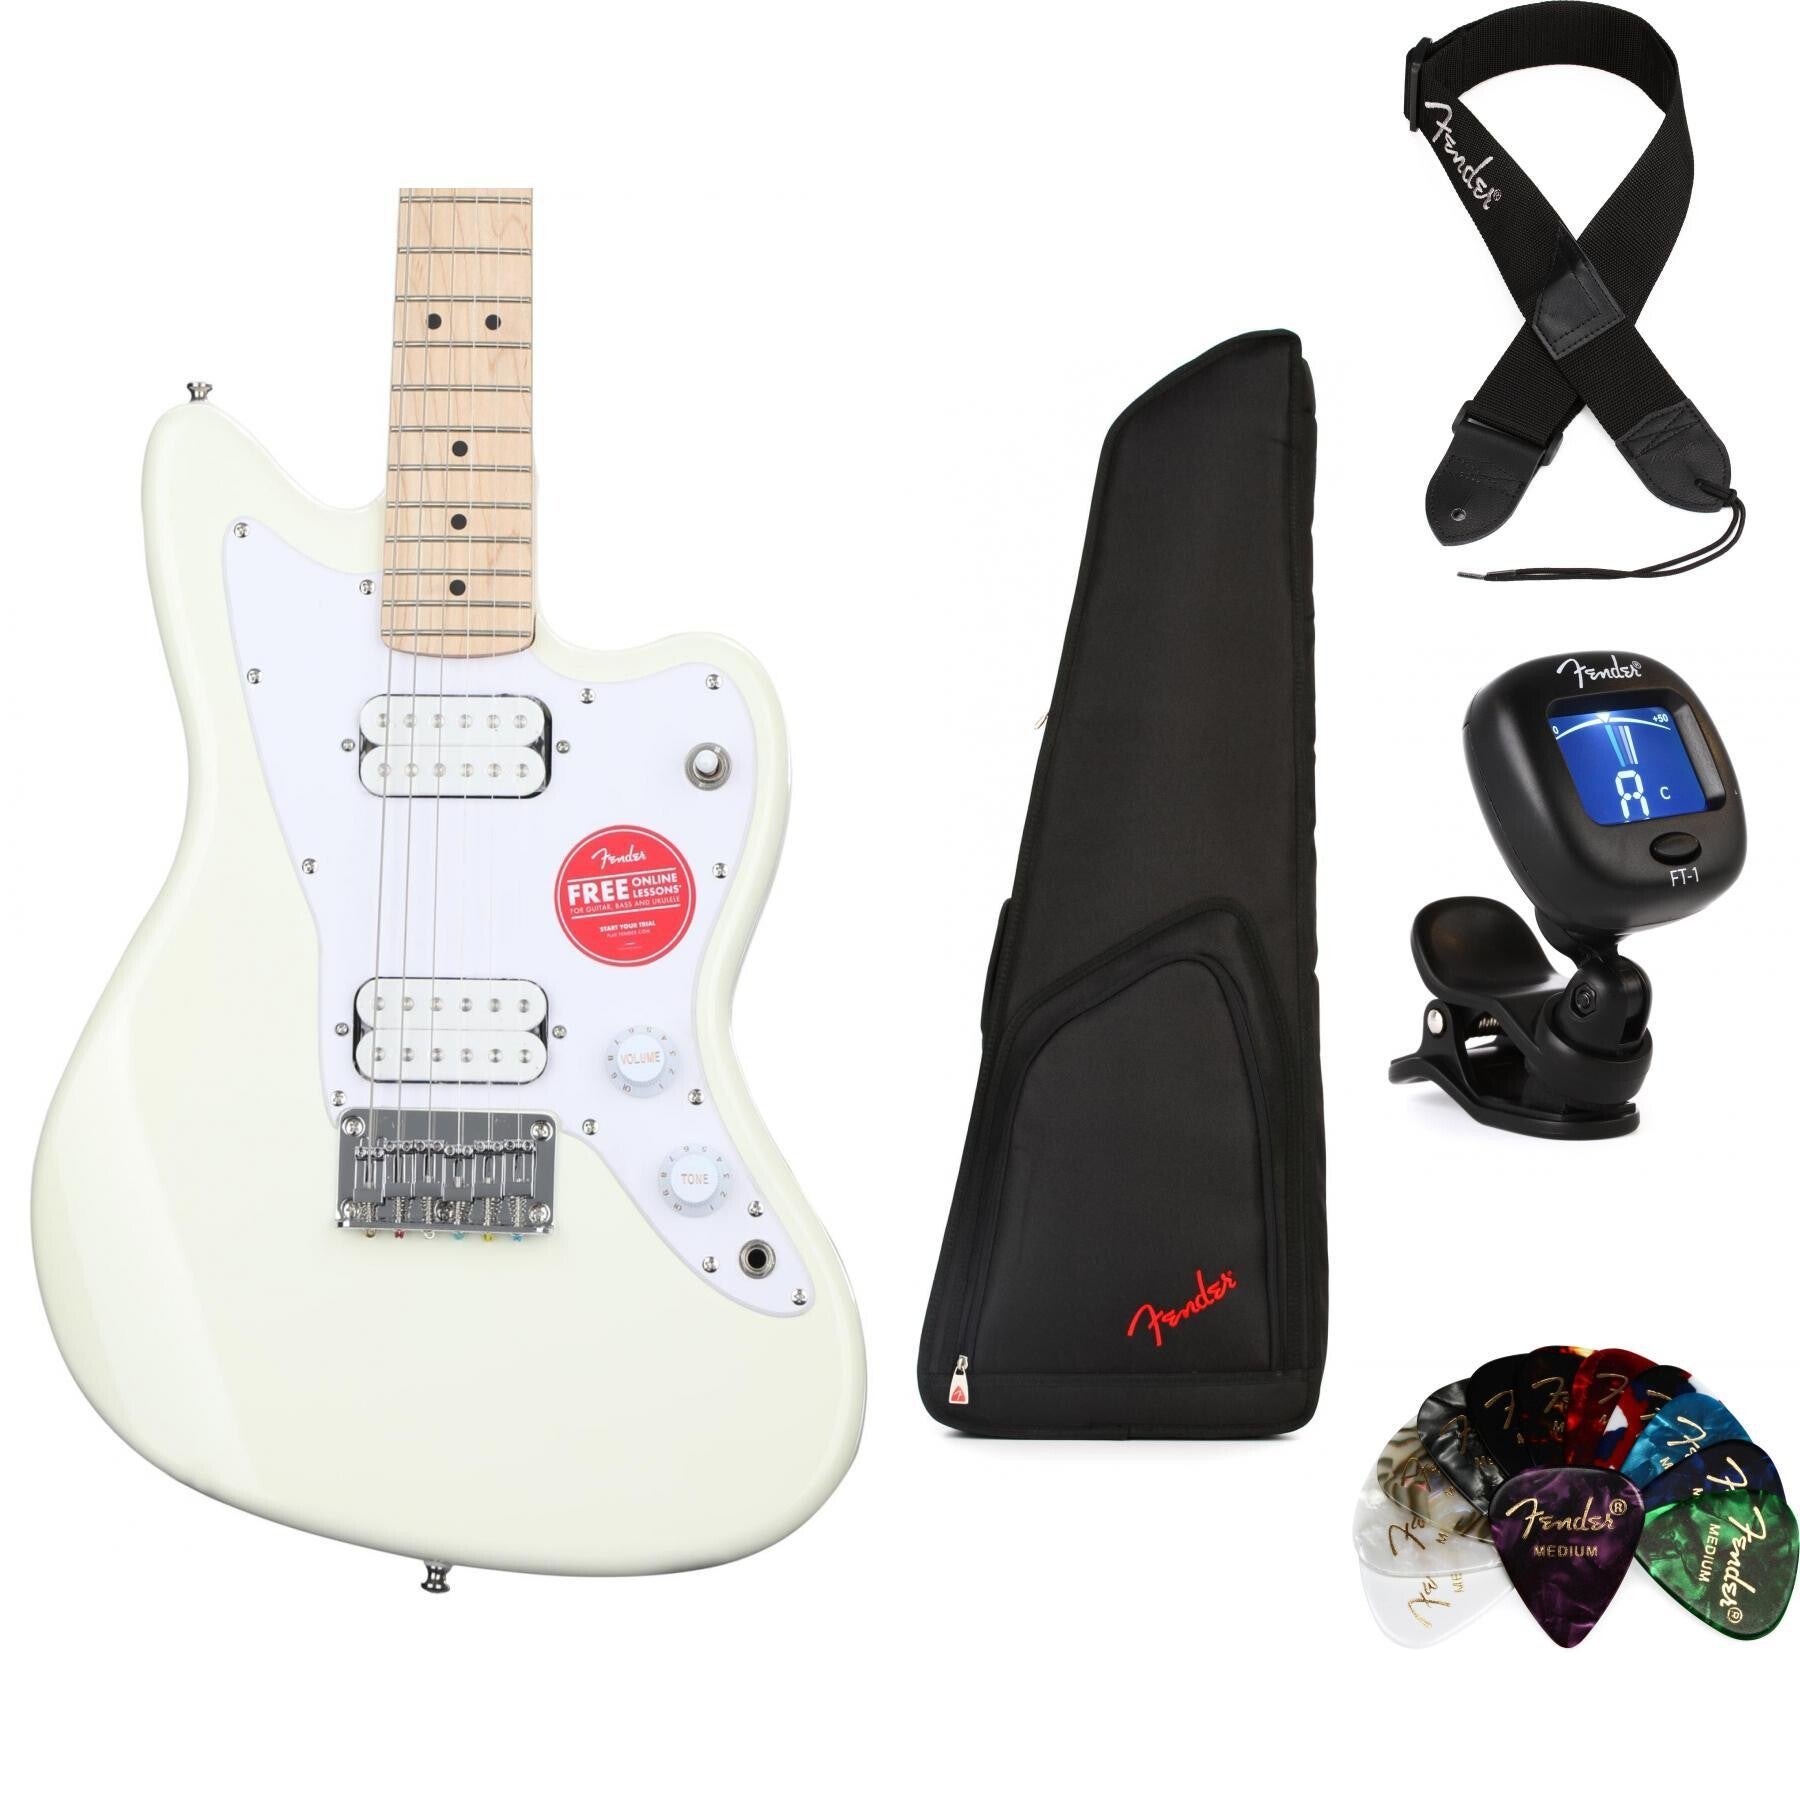 Squier Mini Jazzmaster HH Essentials Bundle - Olympic White with